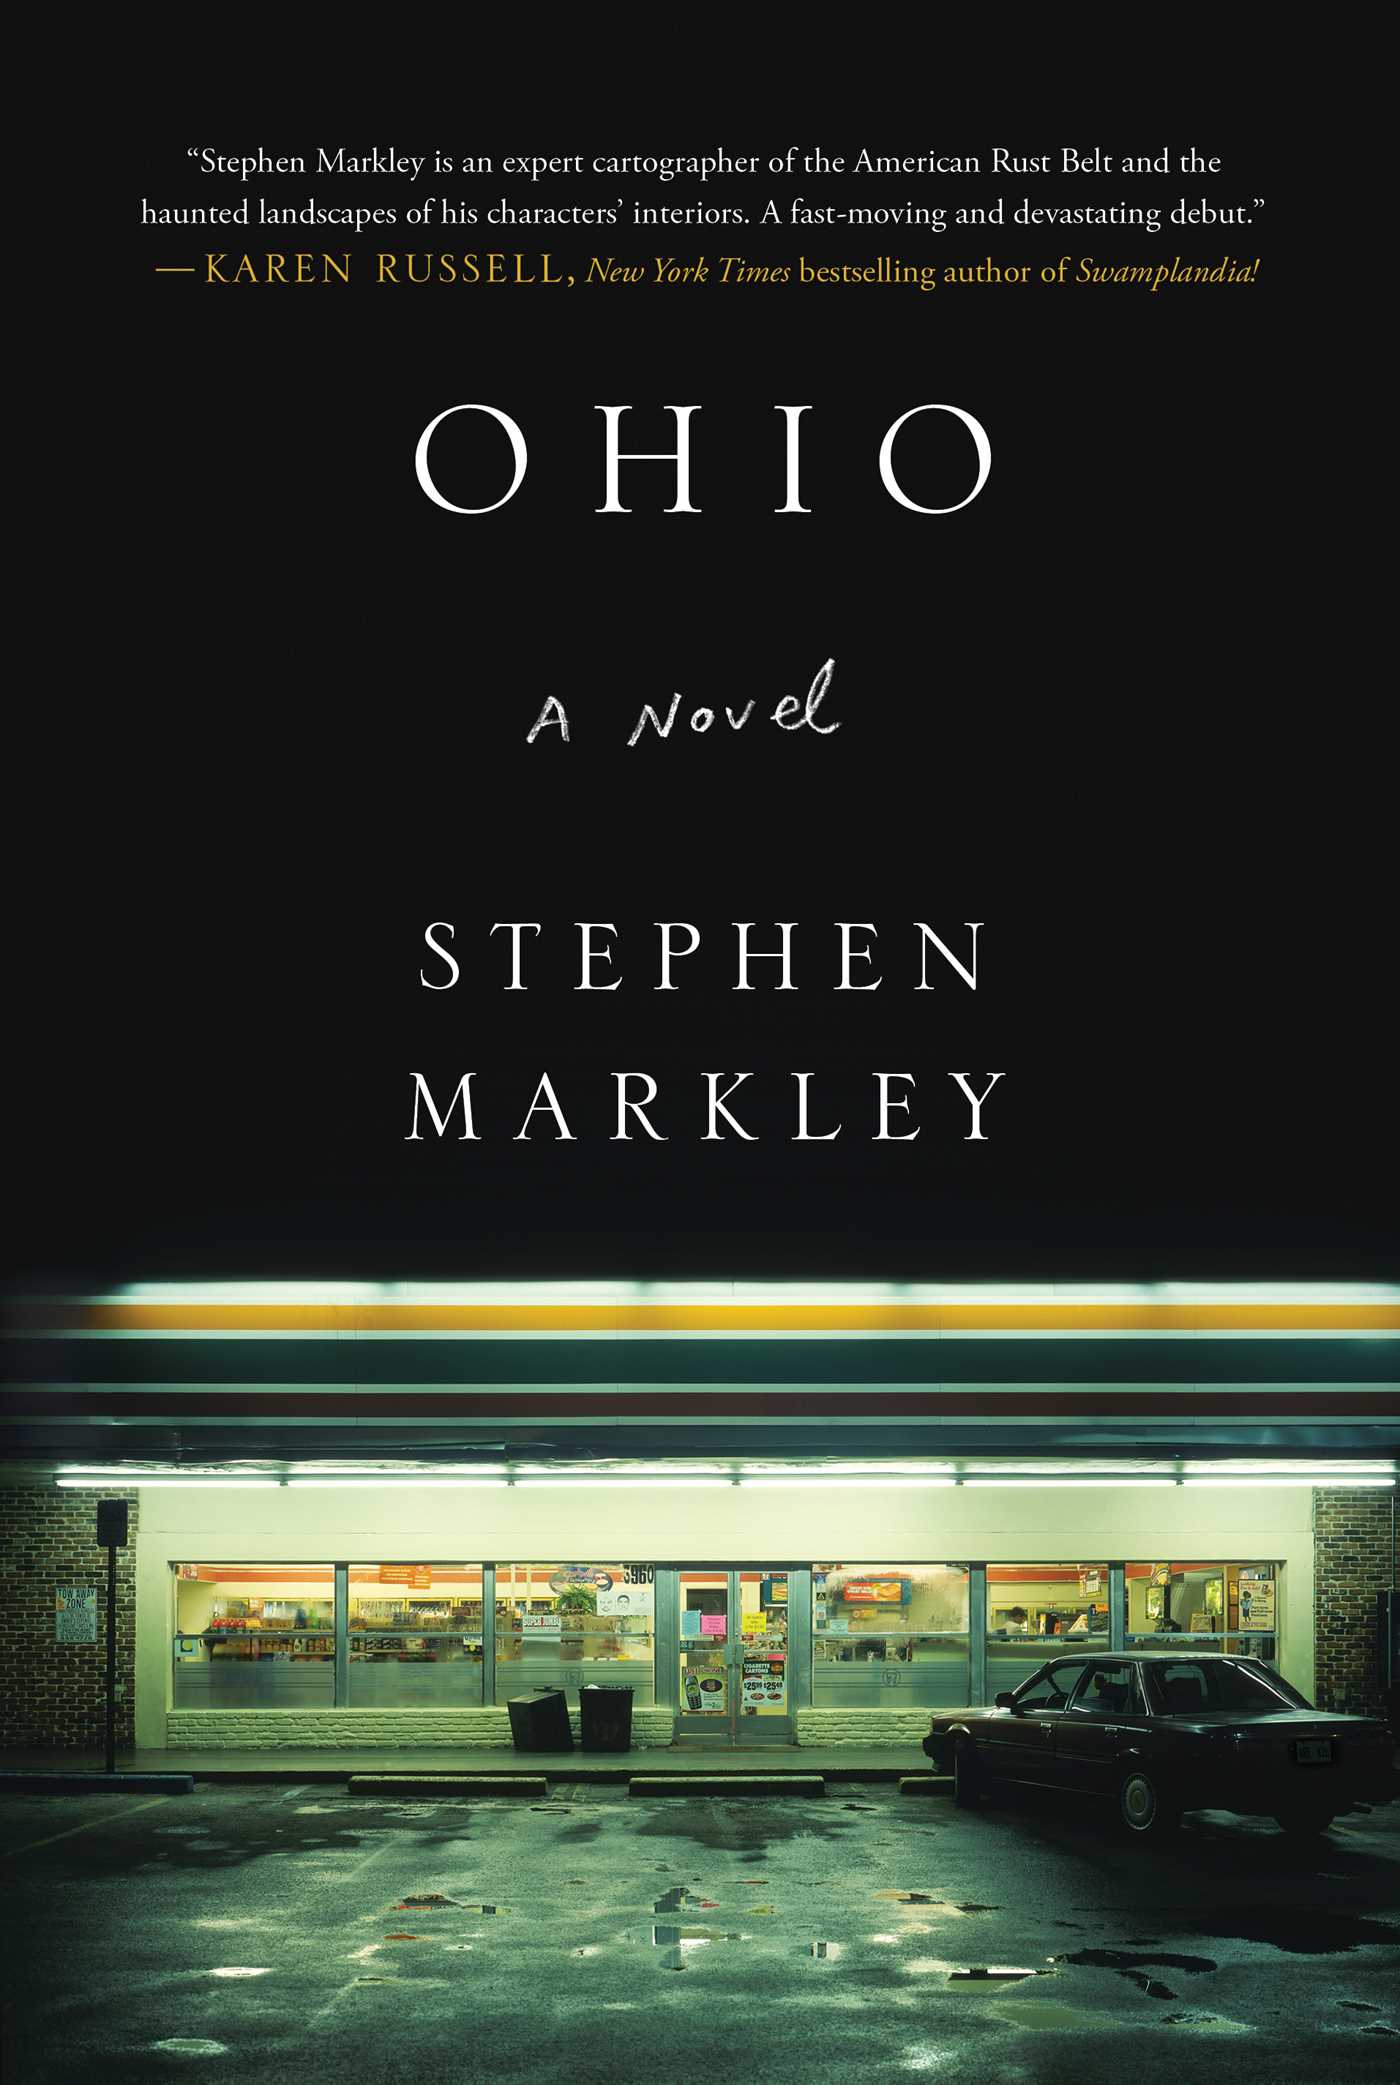 Ohio by Stephen Markley Book Review image pic